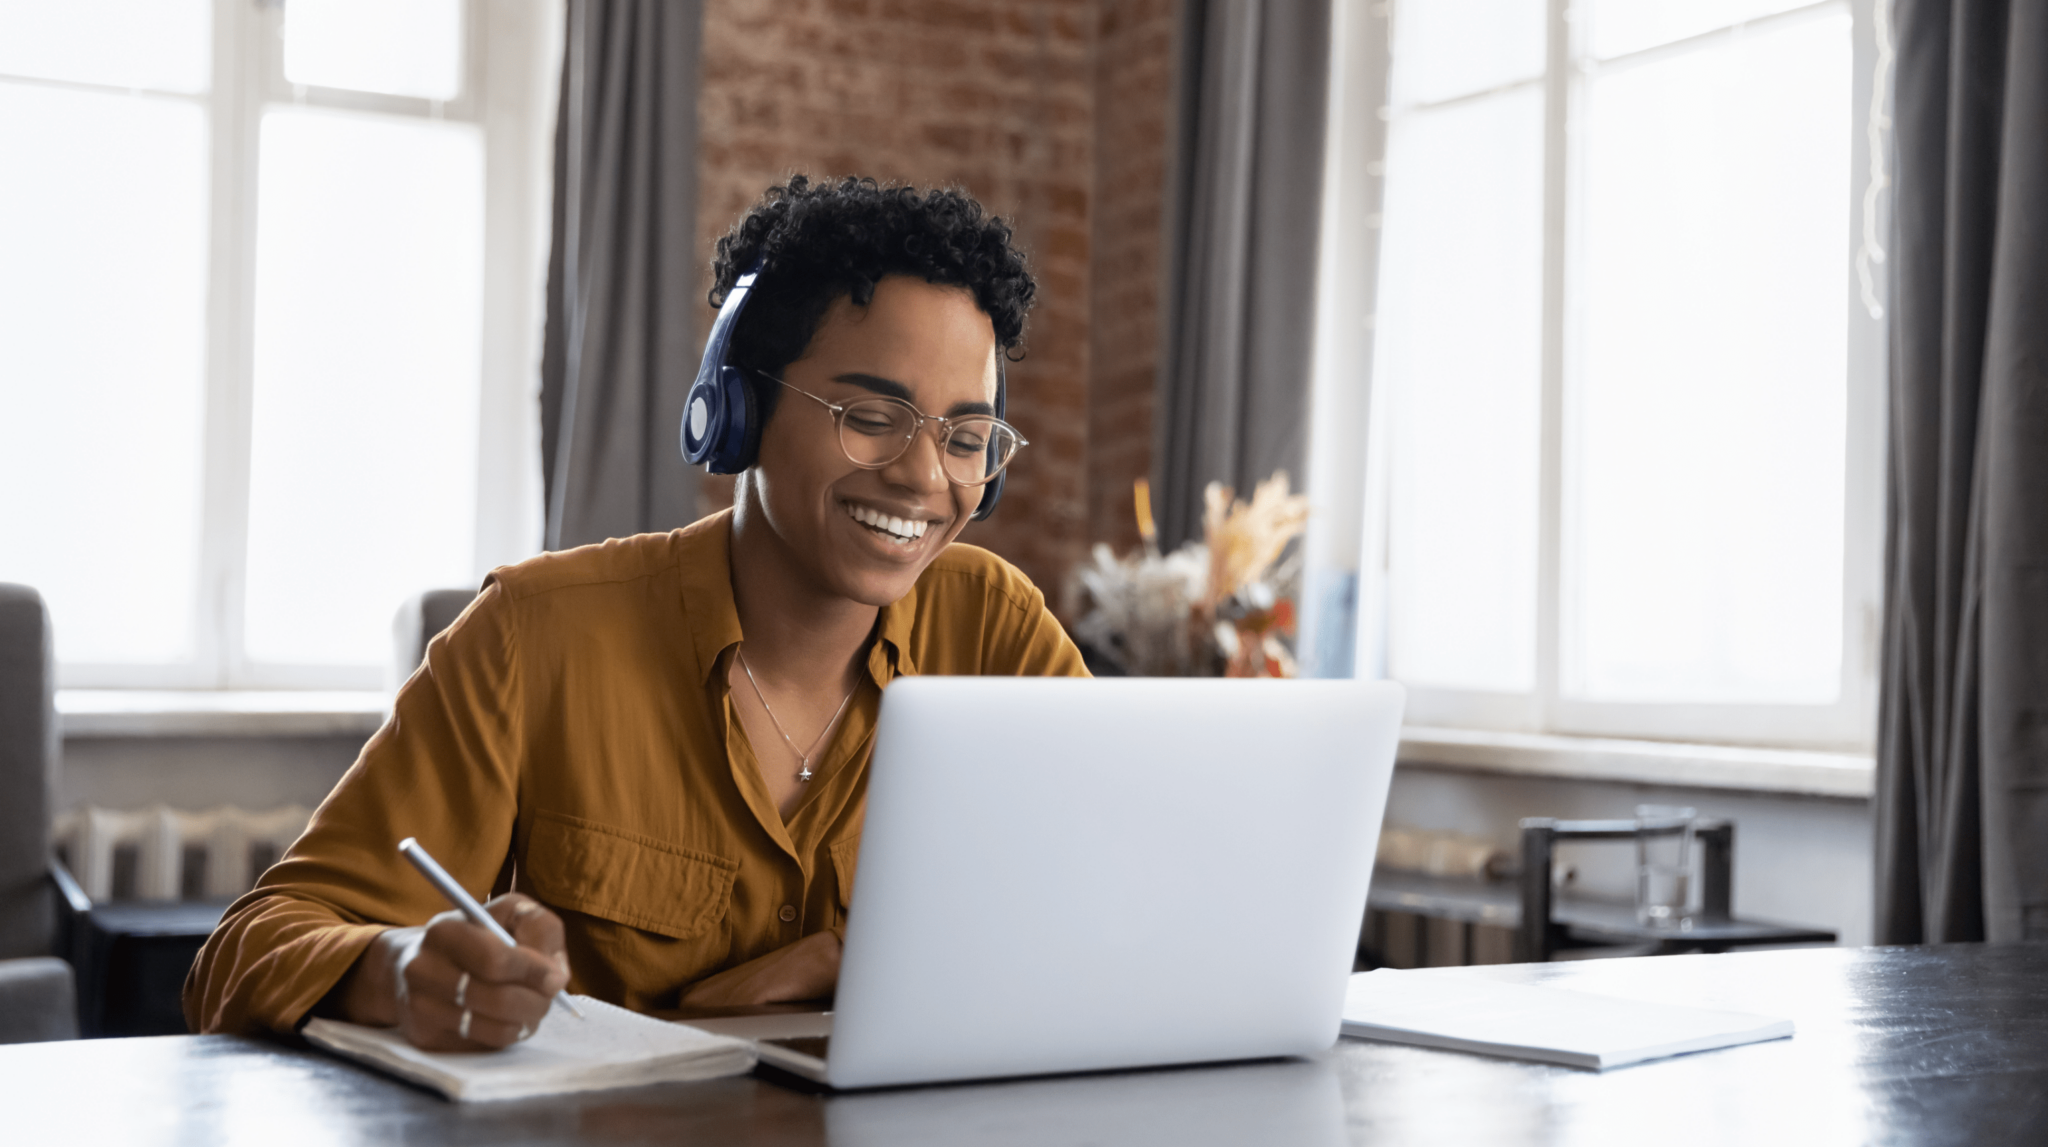 Woman smiling wearing headphones while working on a laptop